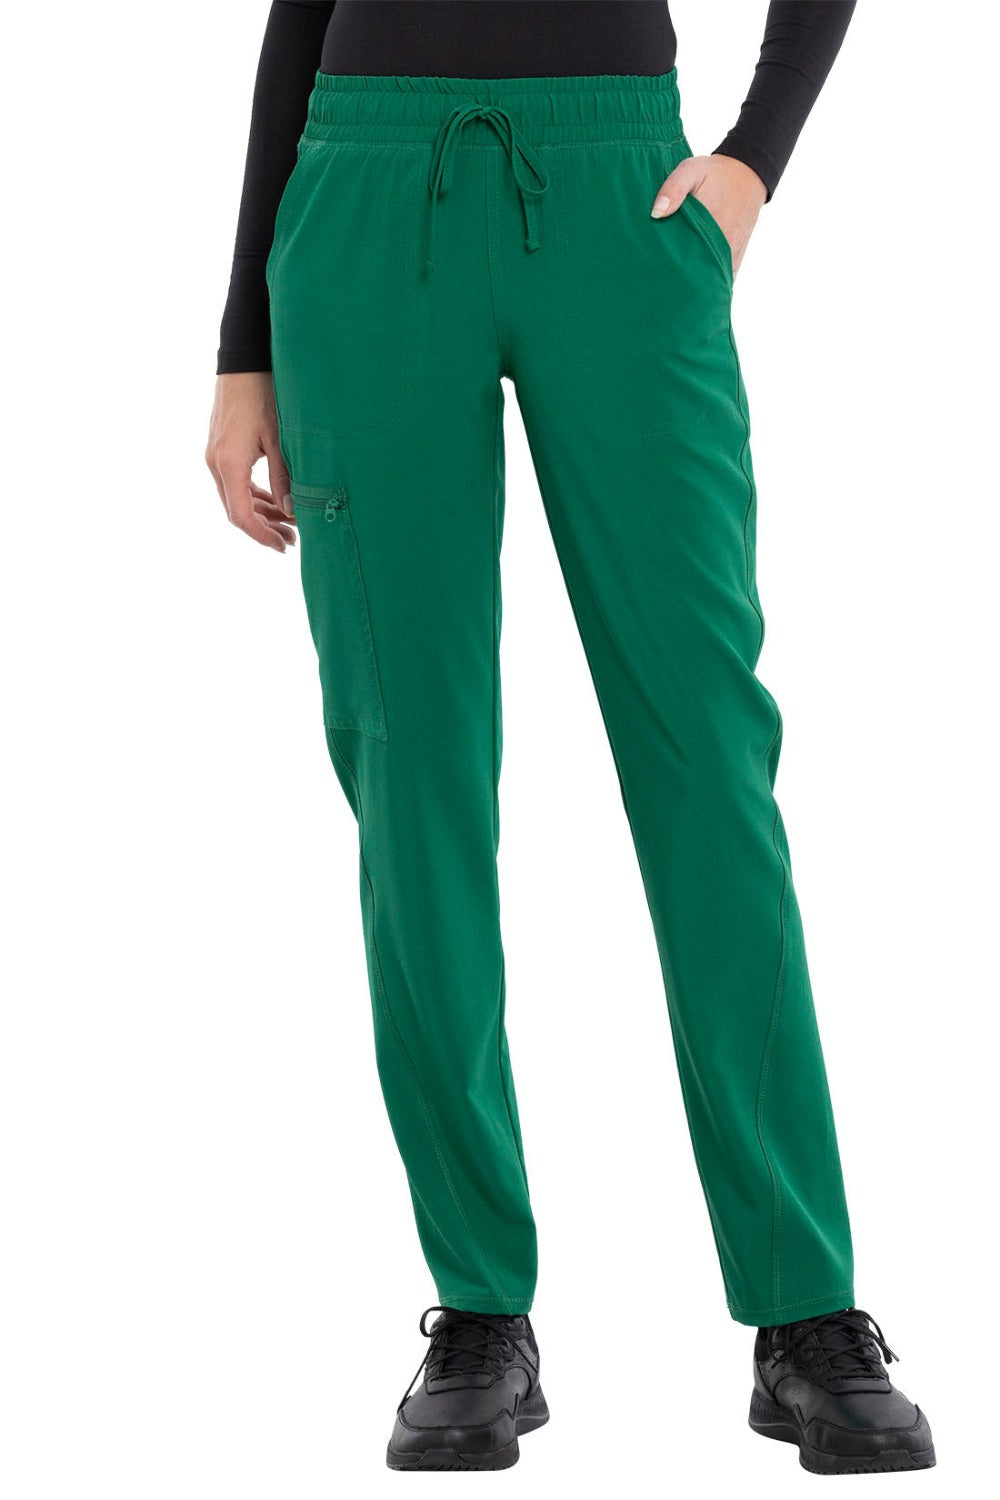 Cherokee Allura Scrub Pant Mid Rise Tapered Leg Drawstring in Hunter at Parker's Clothing and Shoes.